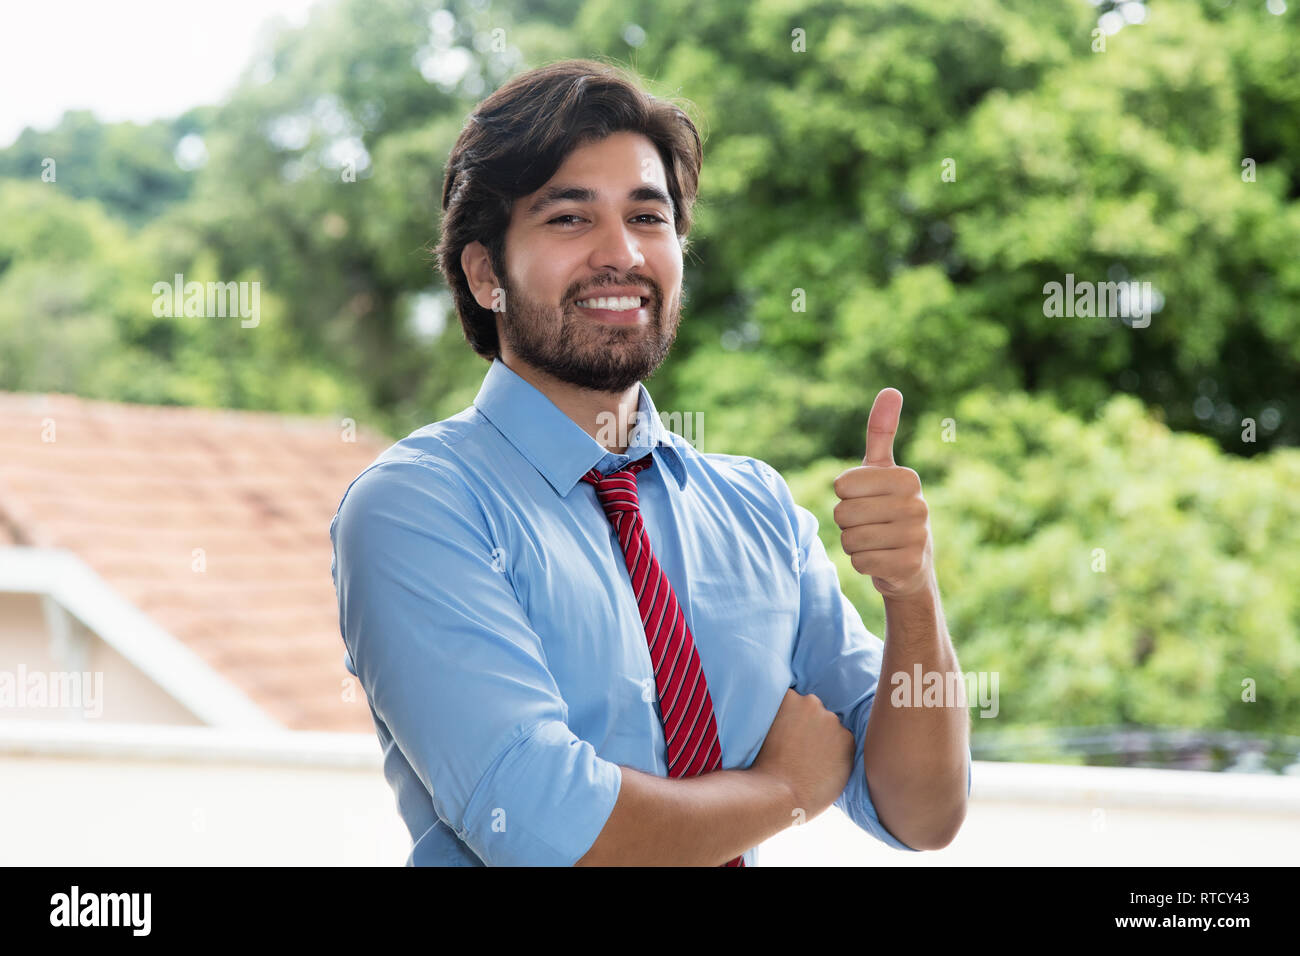 Smart latin businessman with beard showing thumb up outdoors Stock Photo